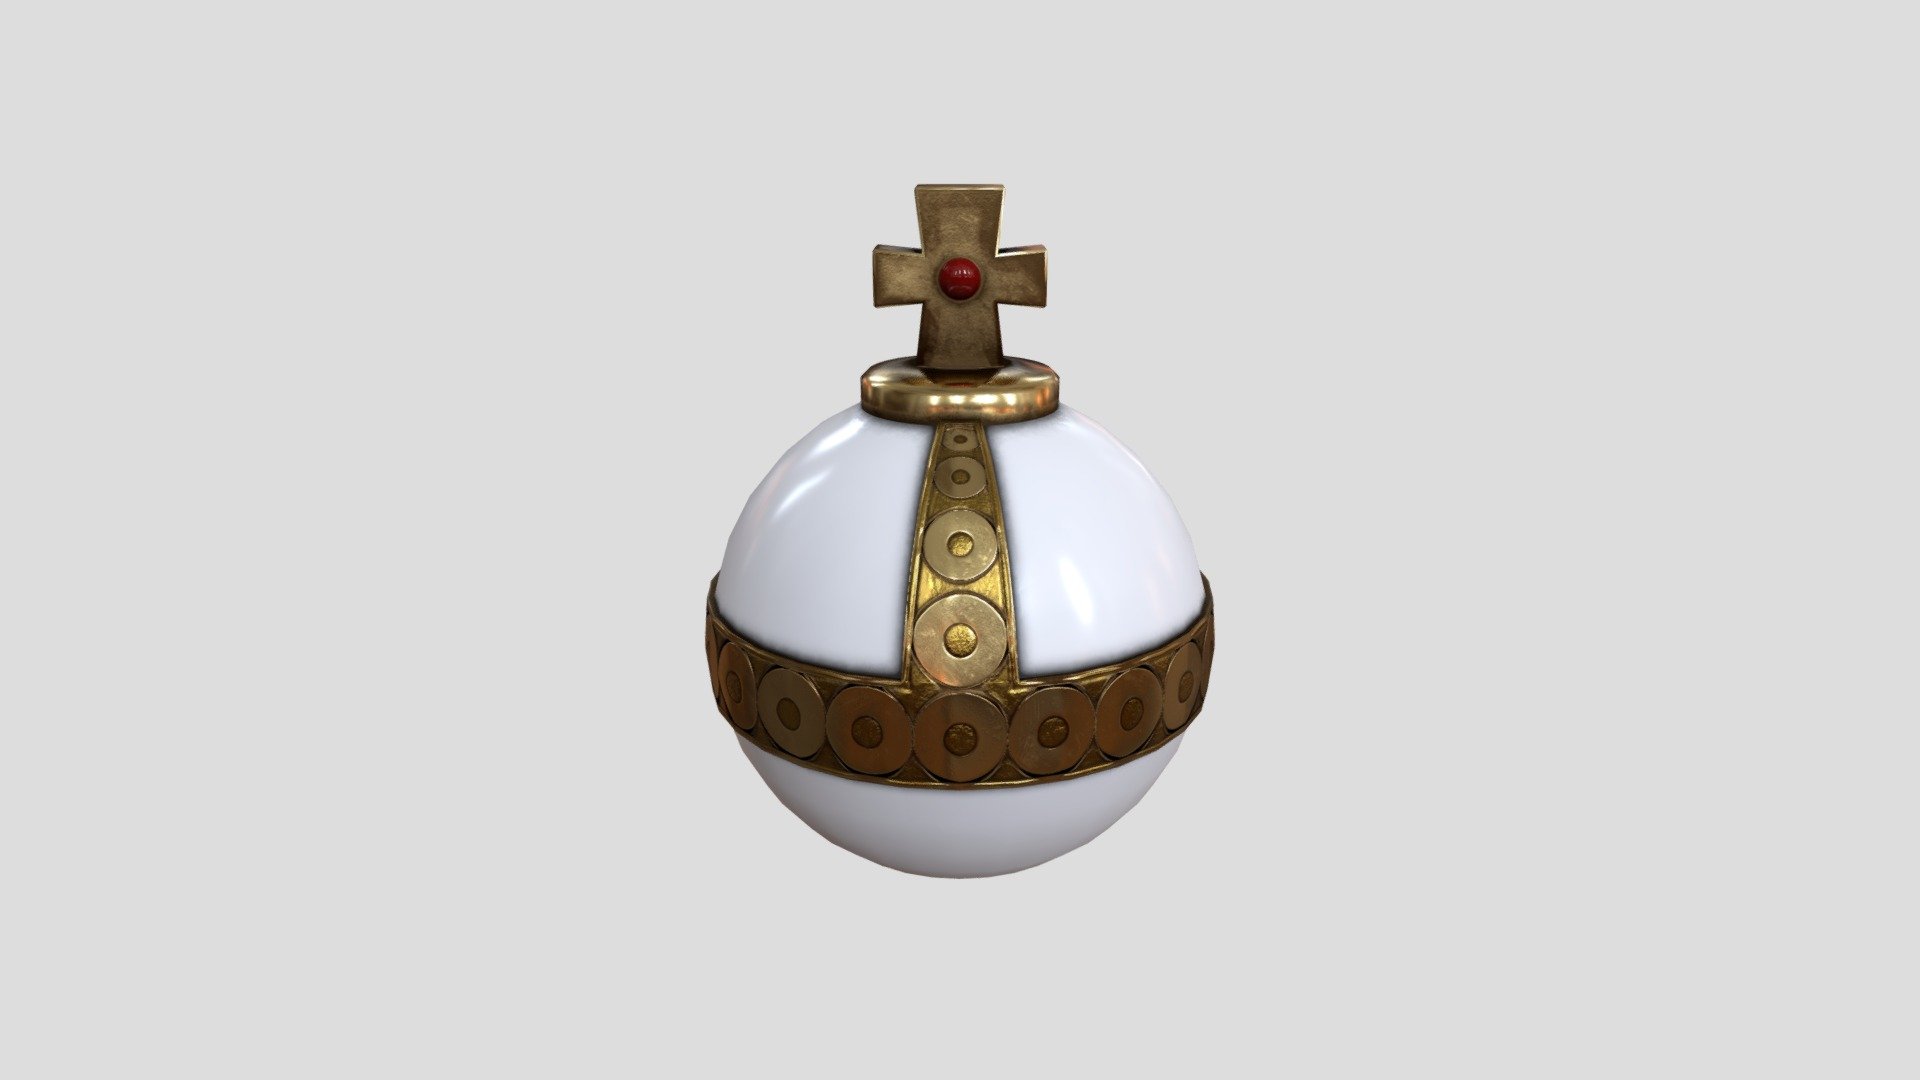 The Holy Hand Grenade  from the game Worms - Holy Hand Grenade - 3D model by Baik 3d model